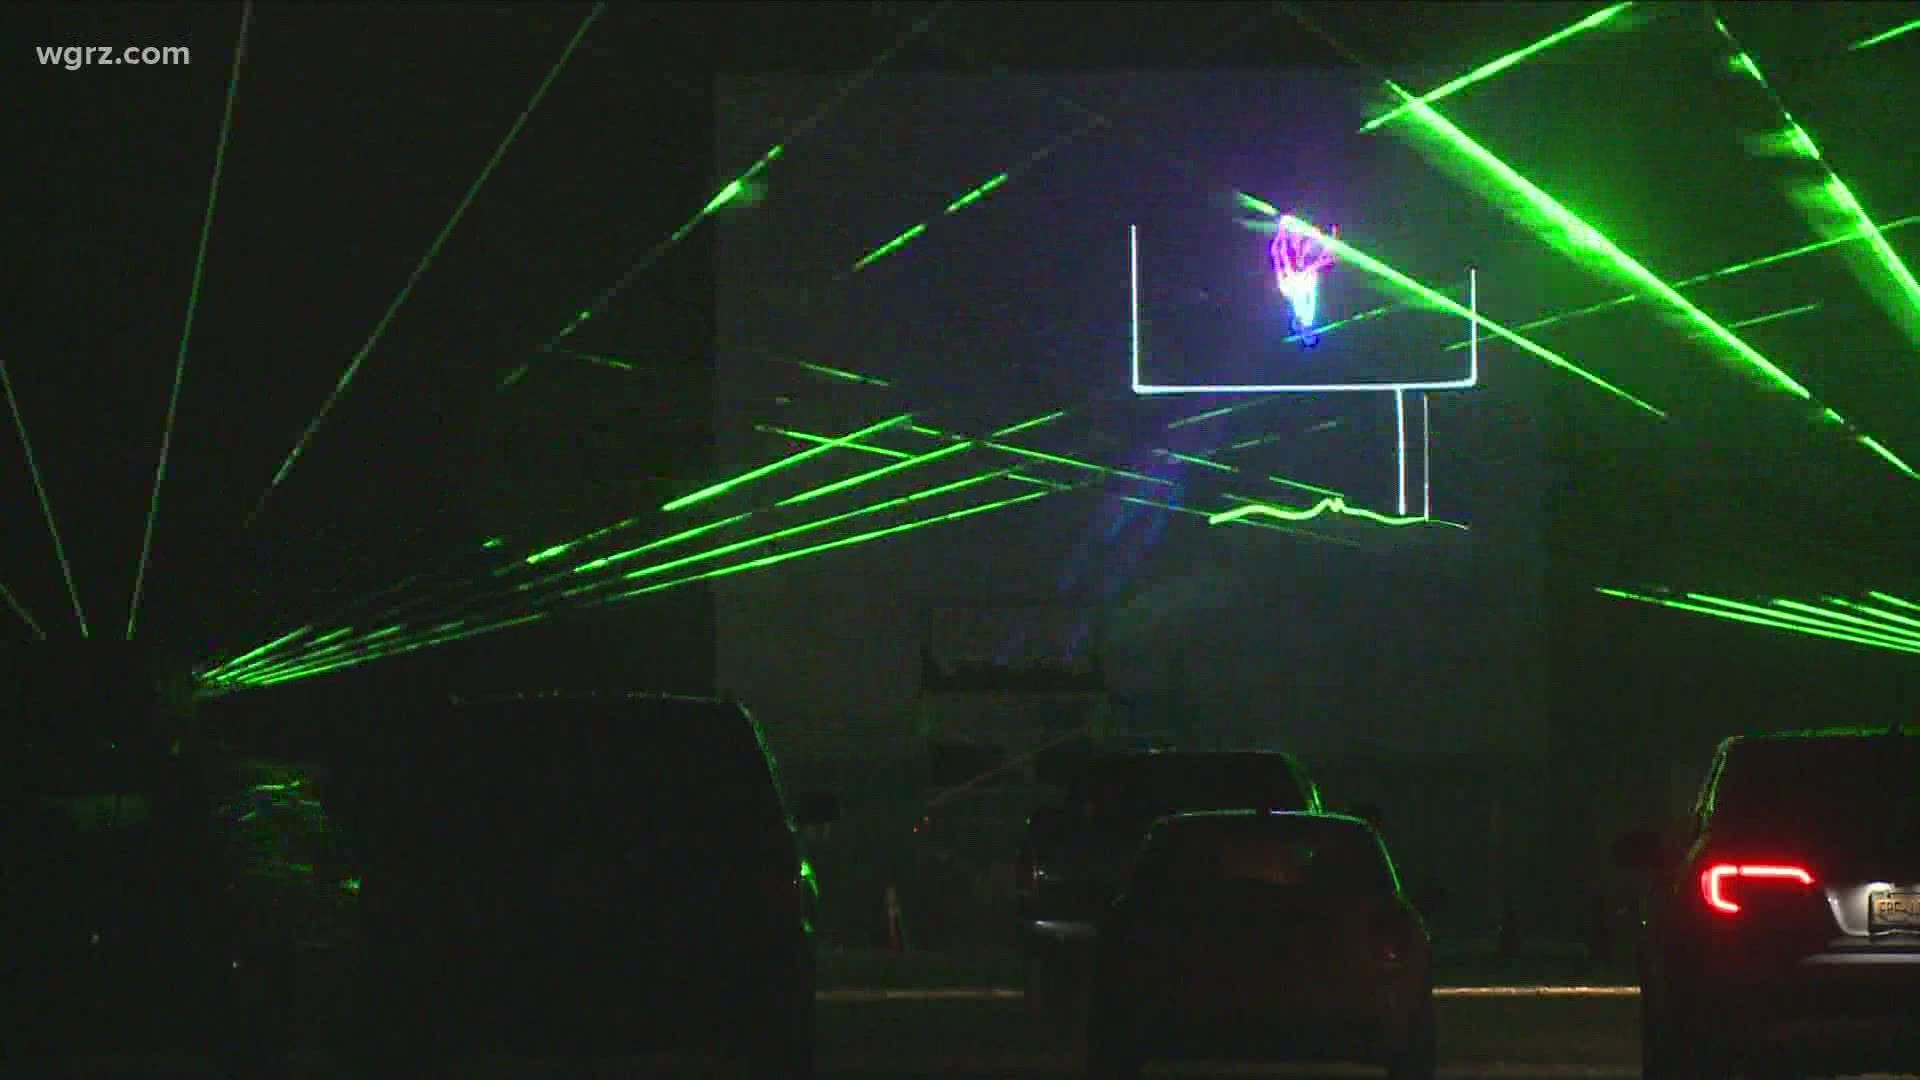 The "Drive-In Laser Light Spectacular" started tonight at Six Flags Darien lake. It's a laser light show set to rock music.